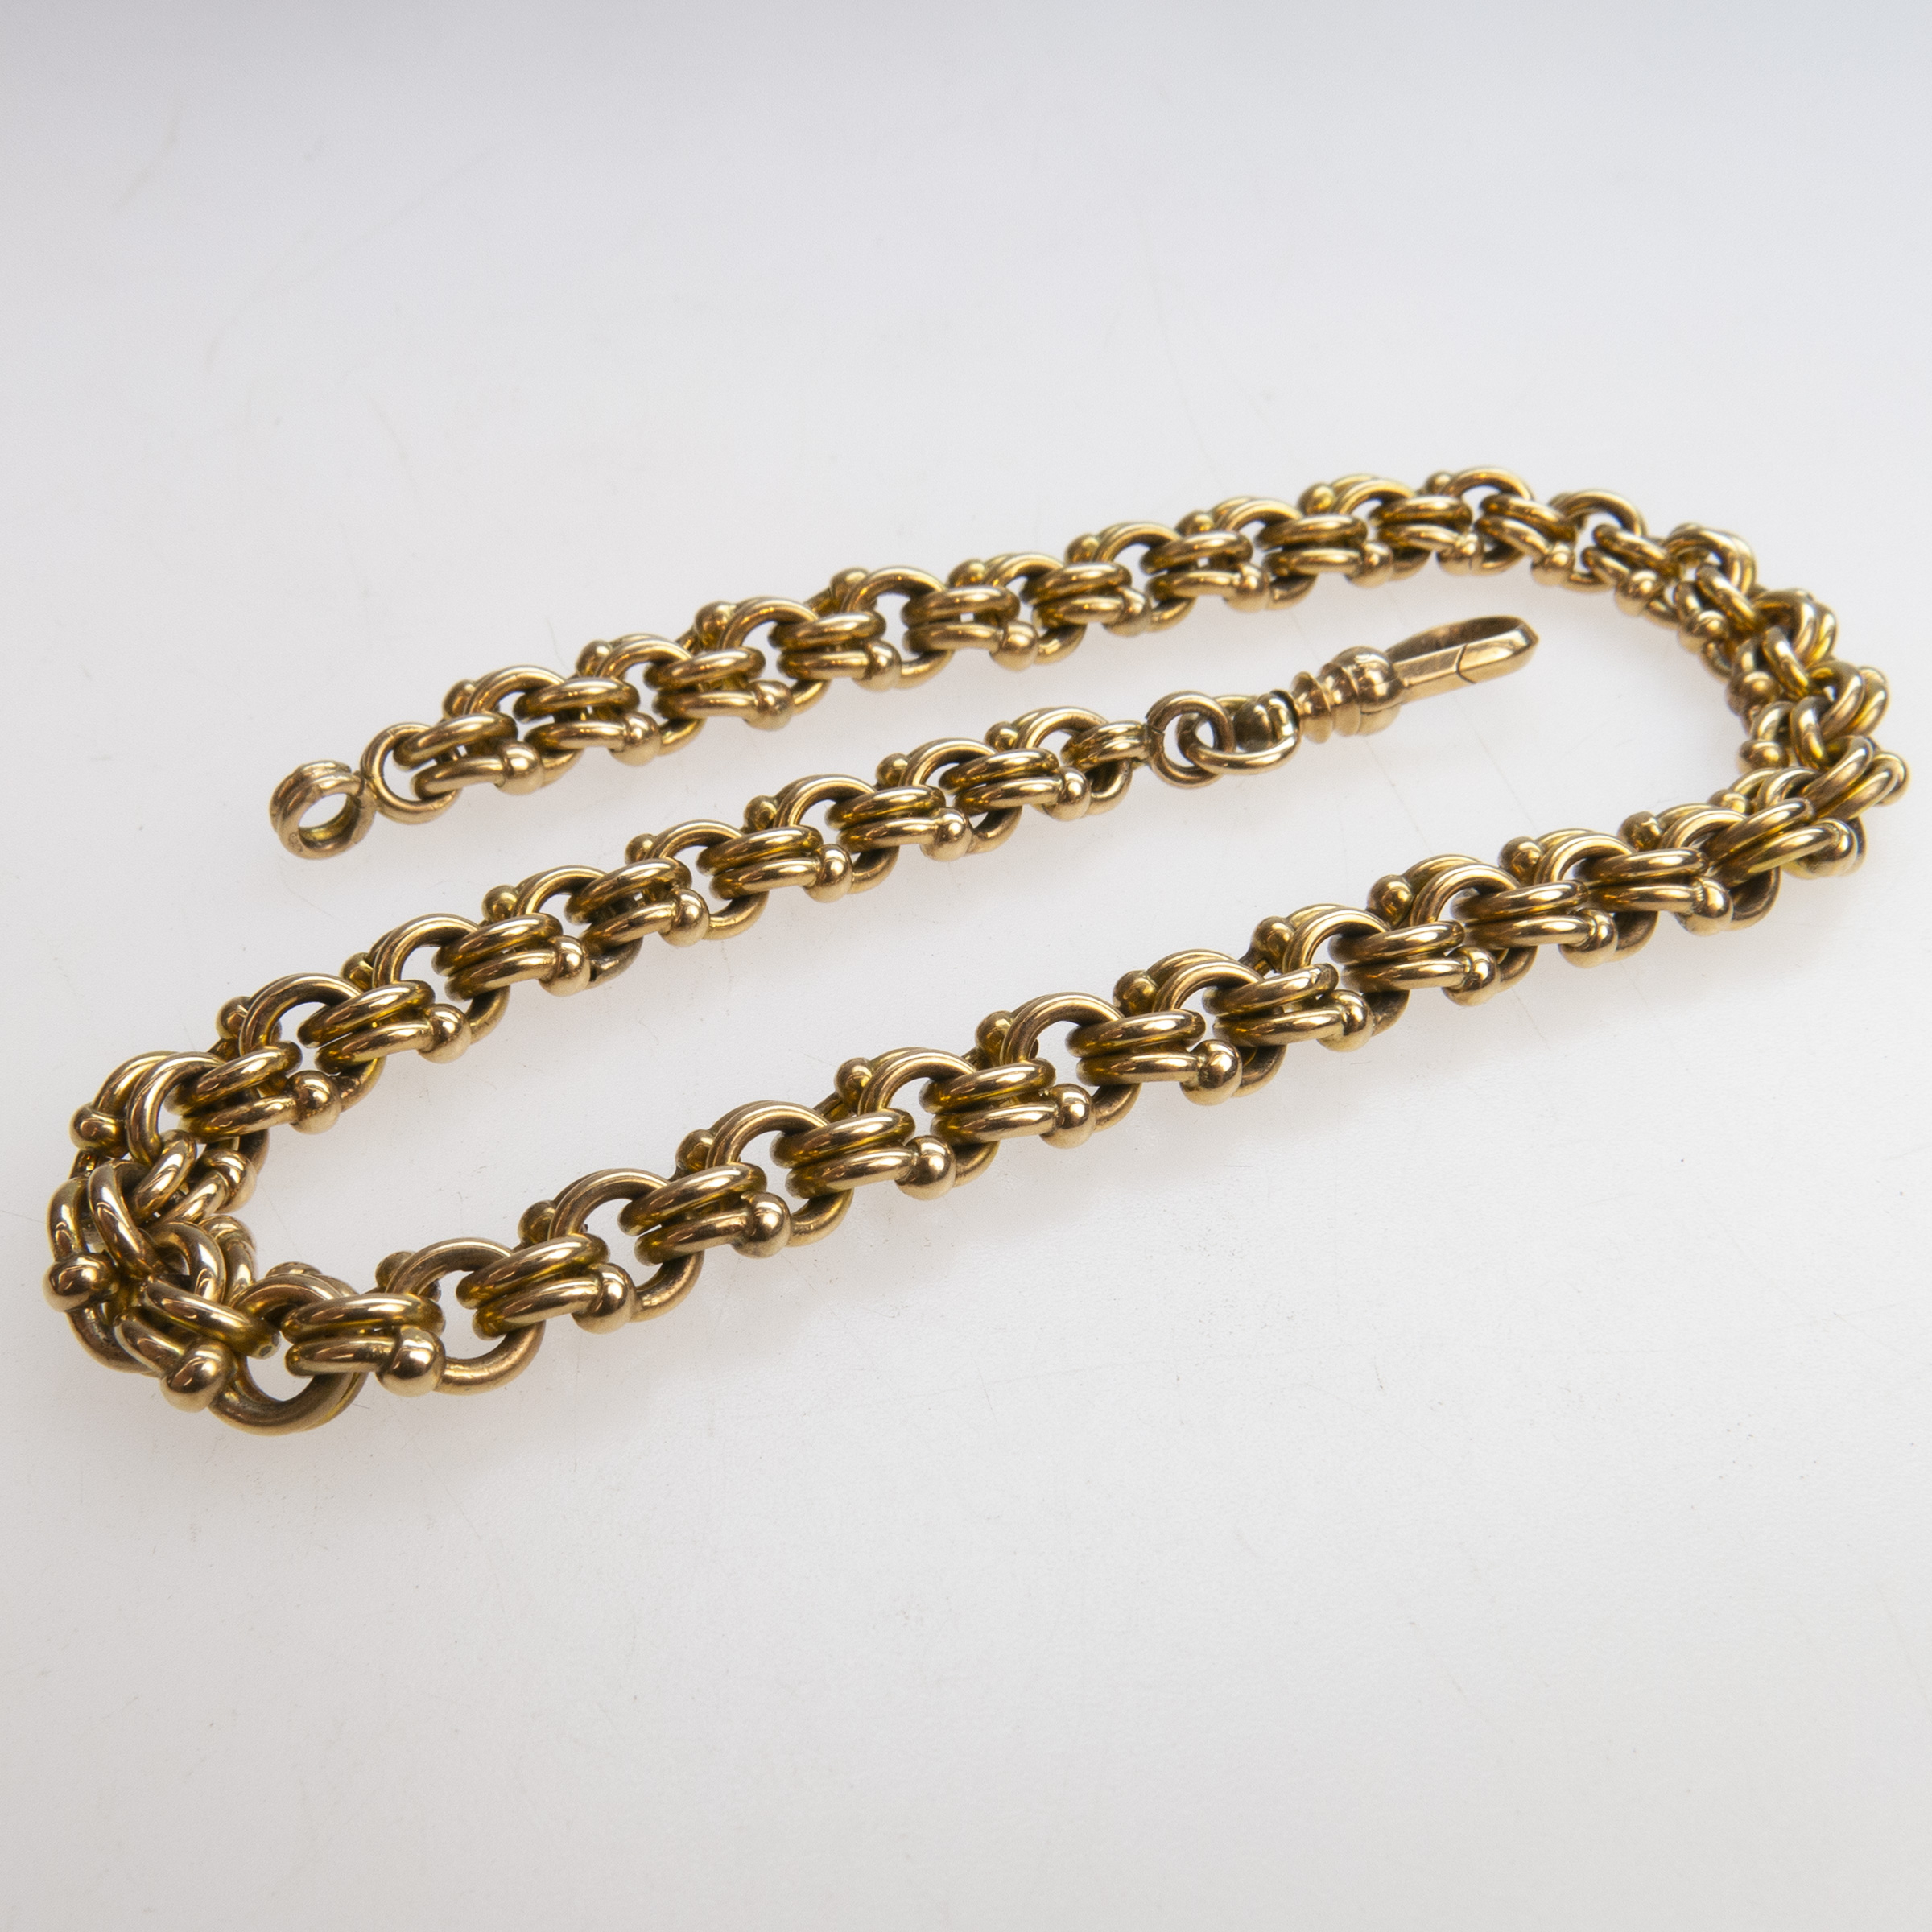 Austro-Hungarian 14k Yellow Gold Double Link Watch Chain